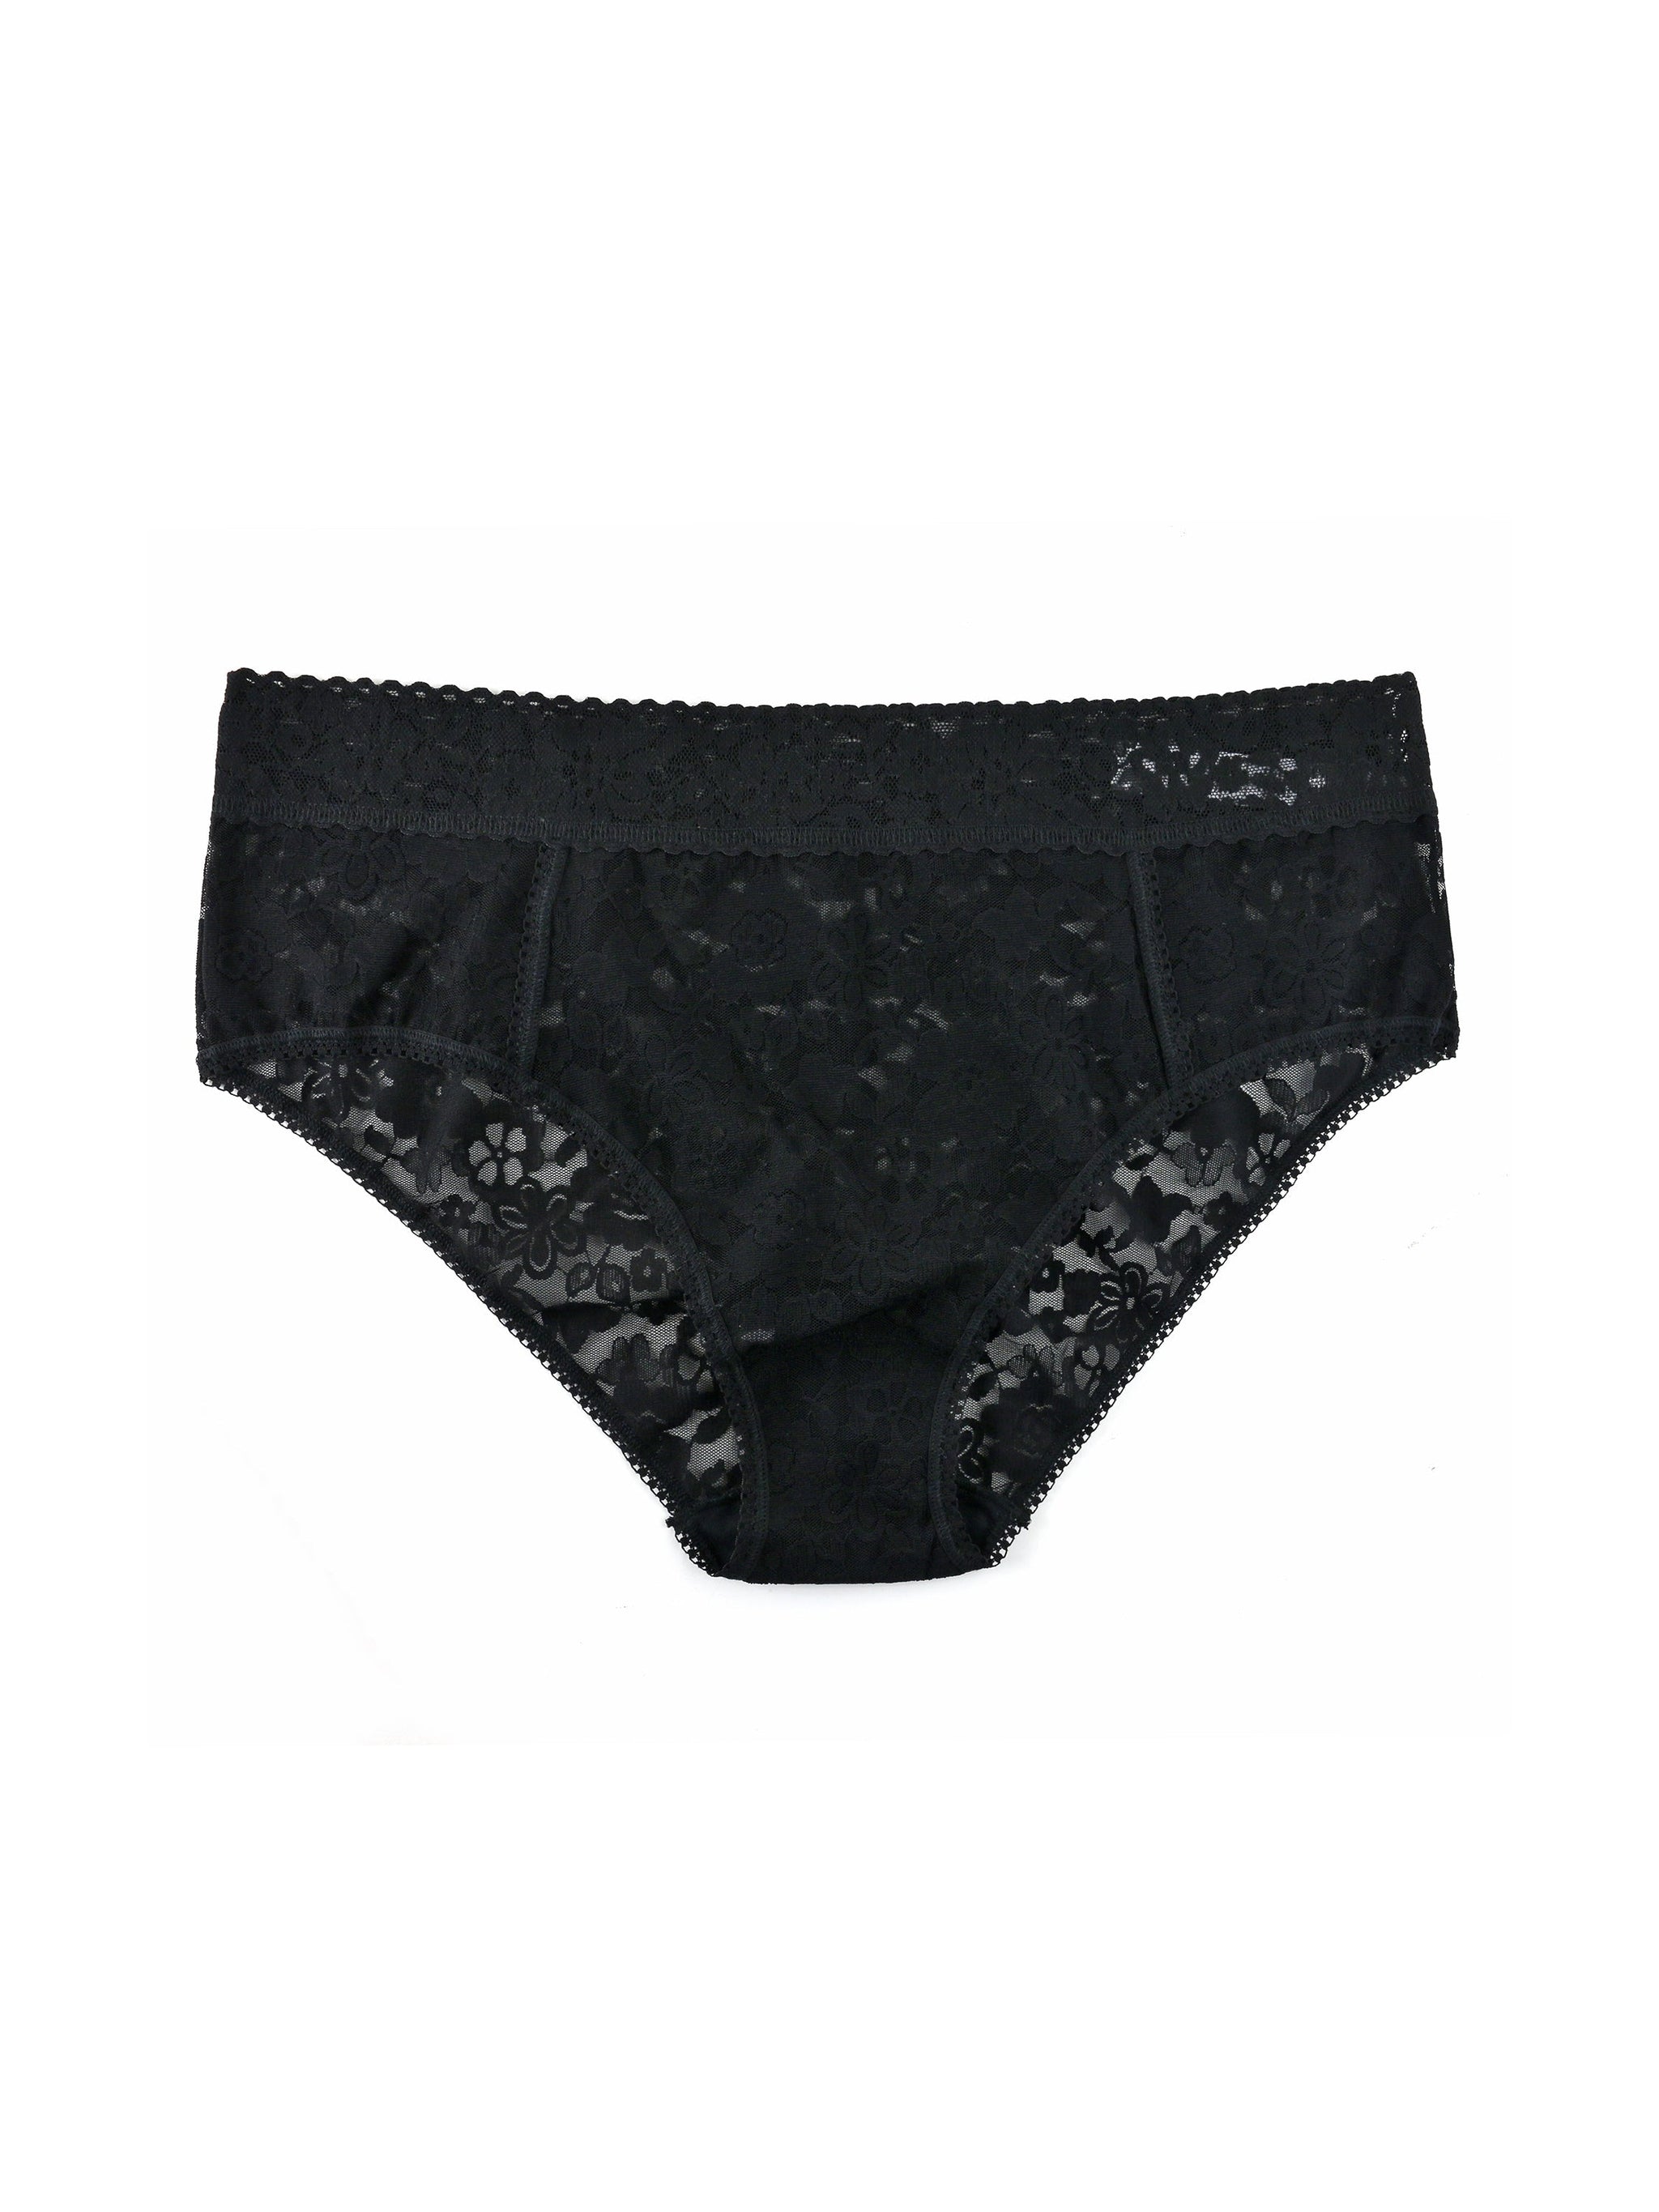 Plus Daily Lace™ Cheeky Brief Black